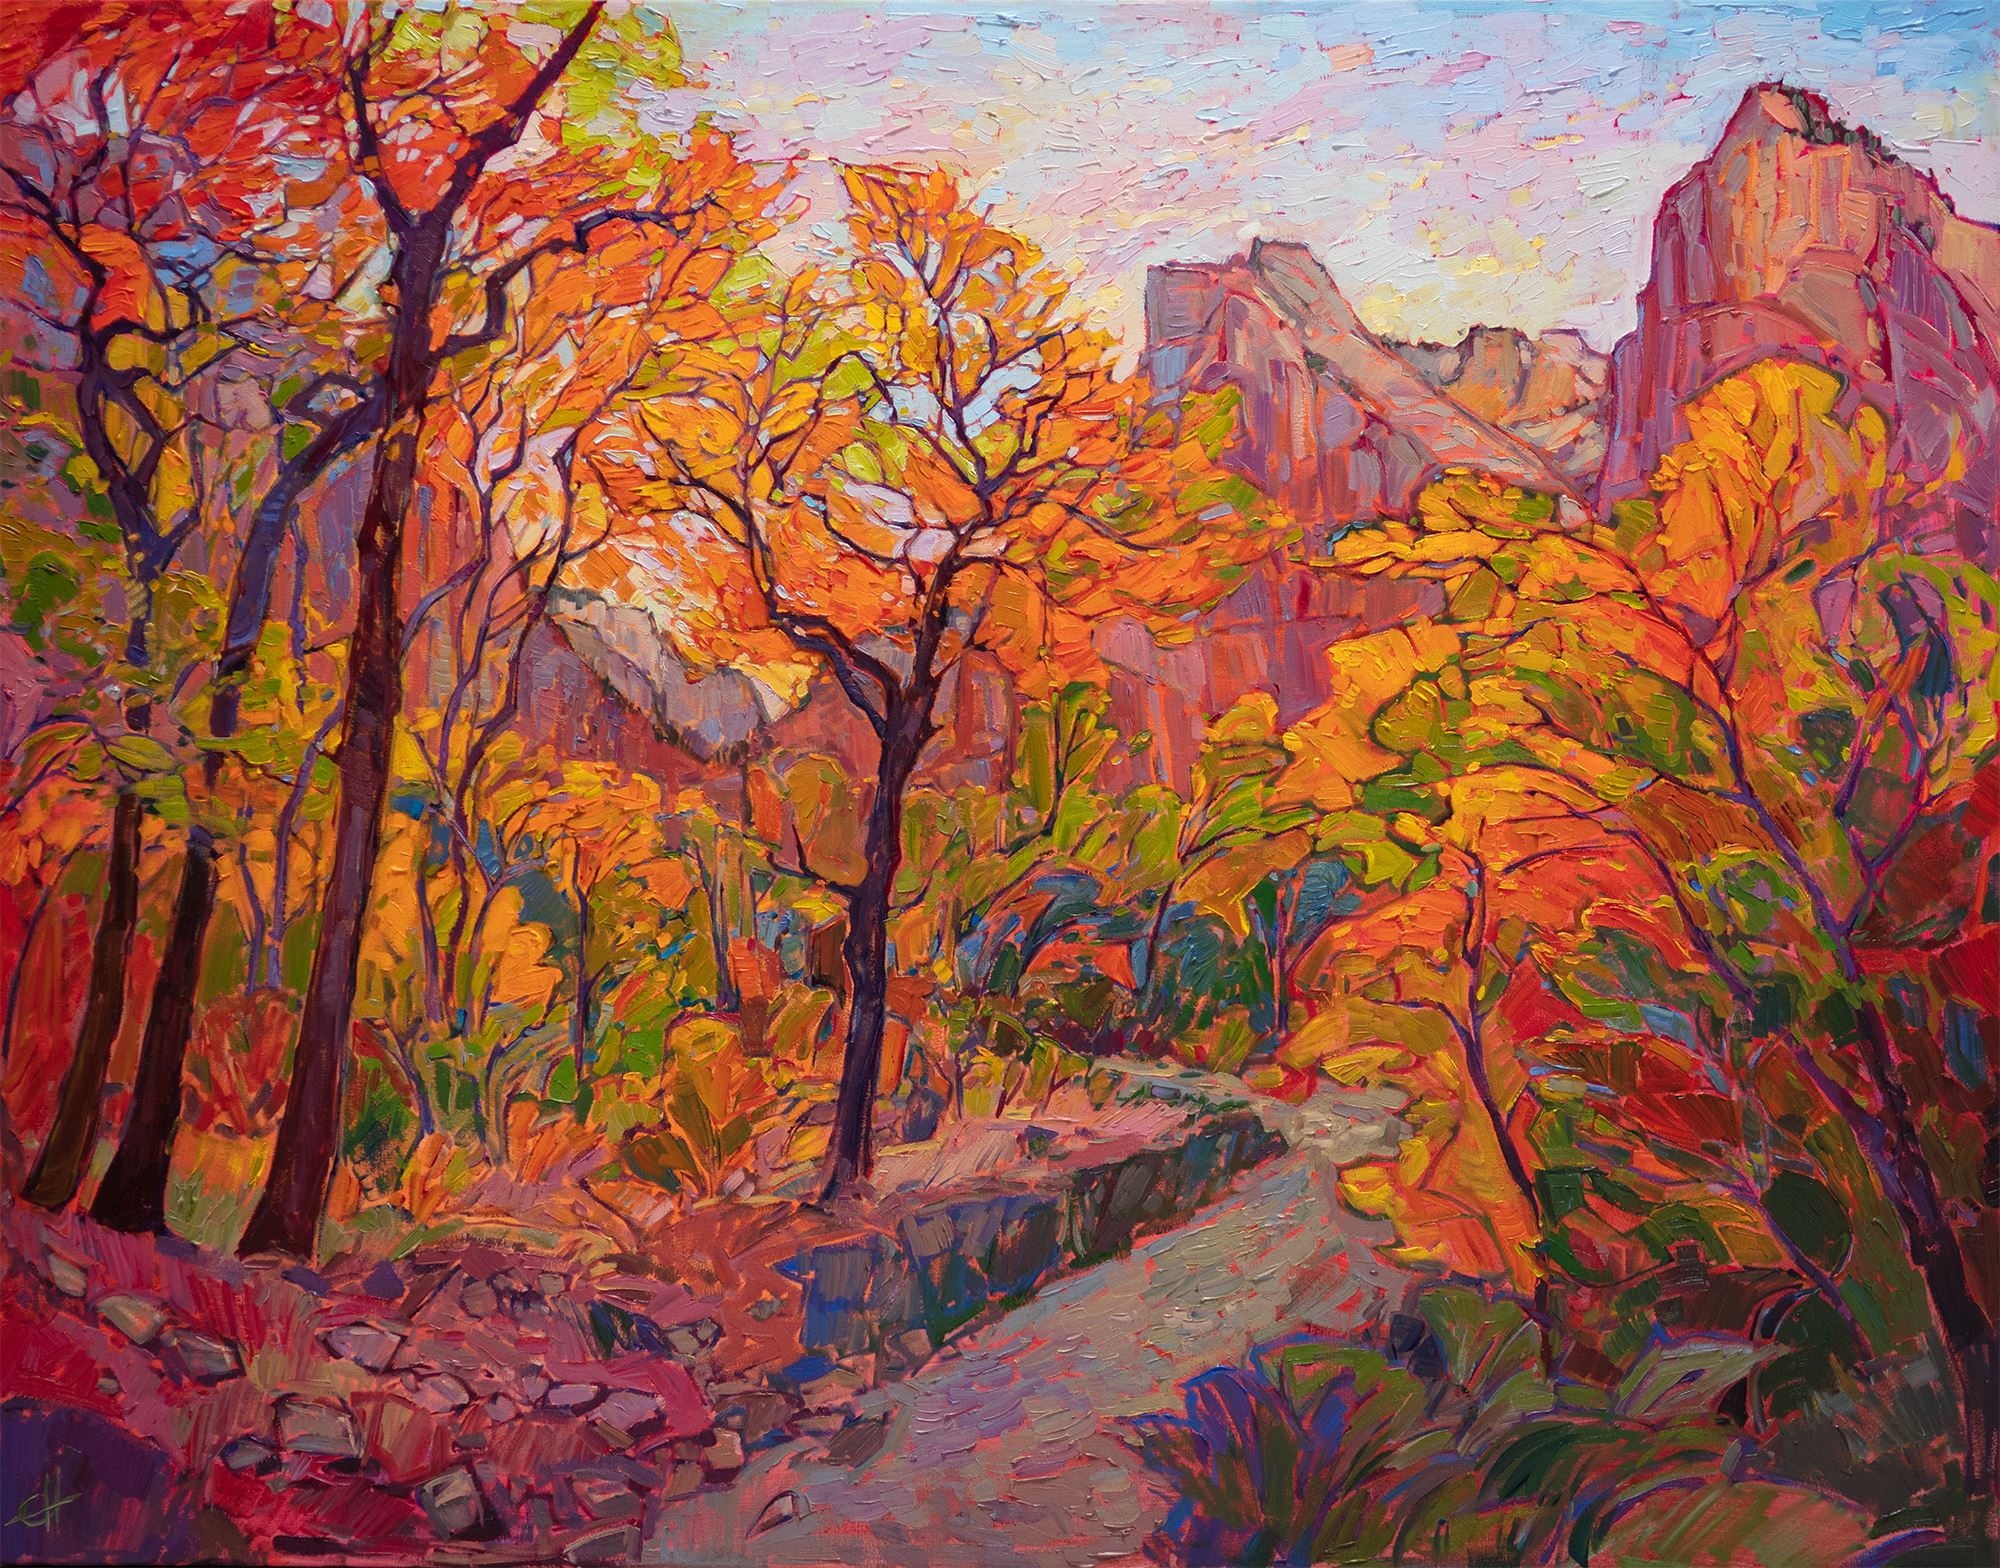 Hues of Zion by Erin Hanson